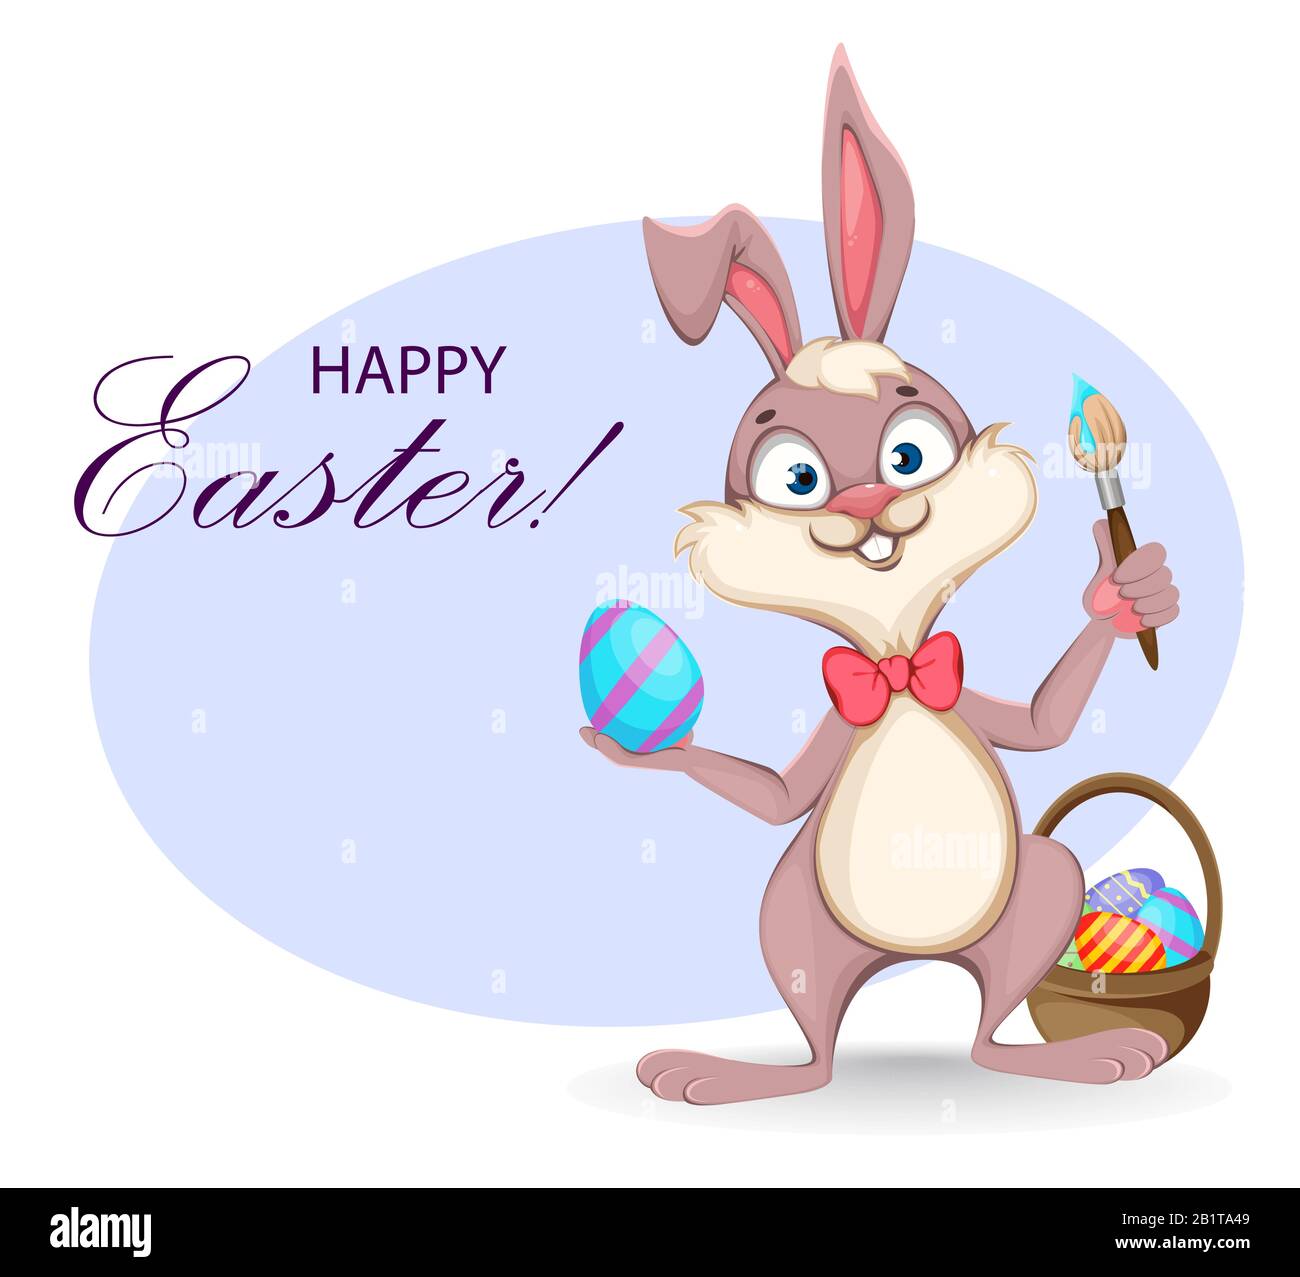 Happy Easter greeting card. Funny cartoon rabbit holds brush and ...